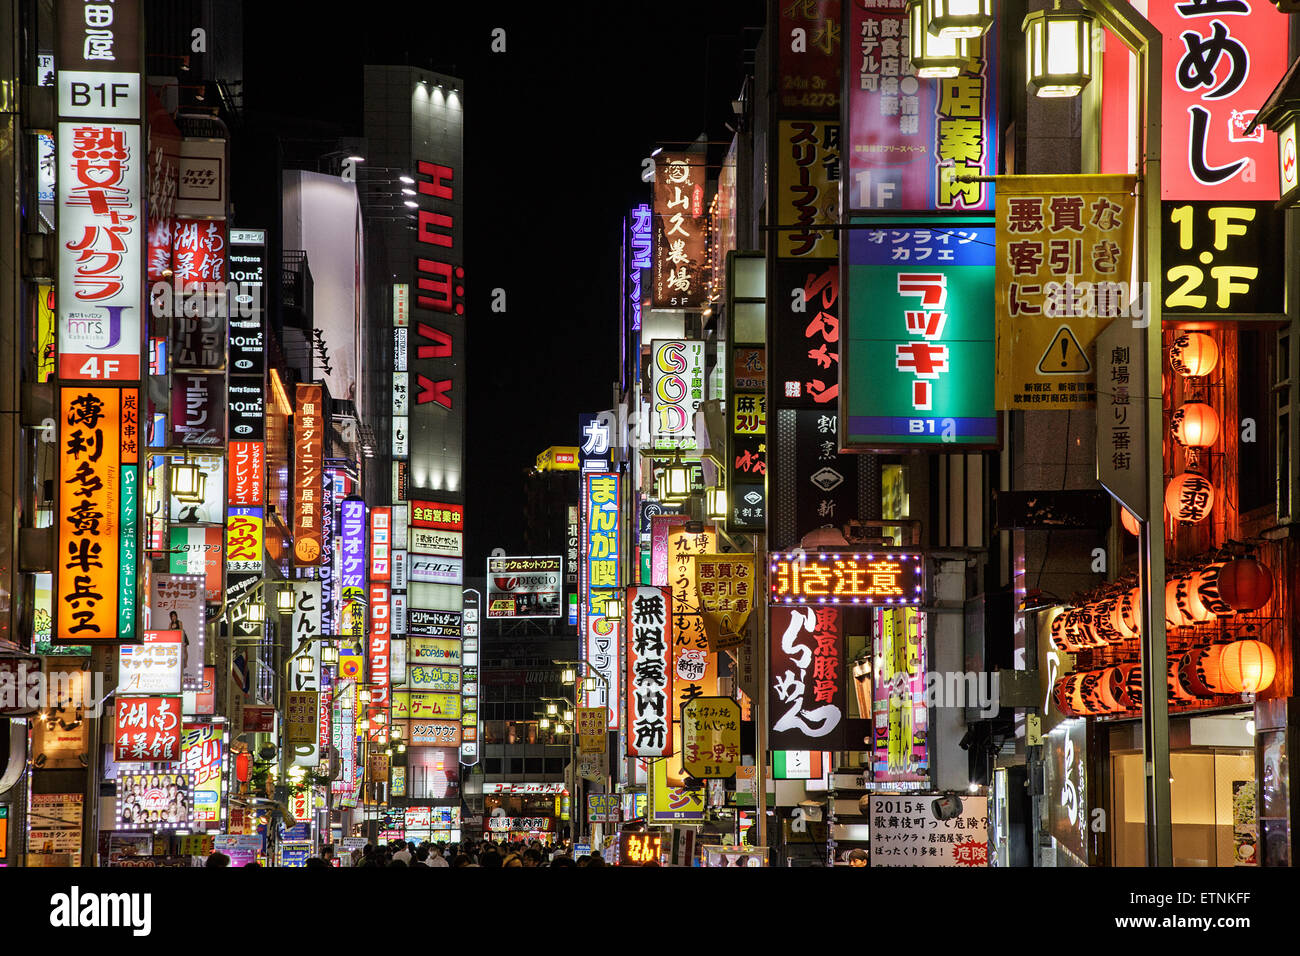 Neons and bright lights in one of streets of Kabukicho entertainment and red light district at night in Shinjuku, Tokyo, Japan Stock Photo